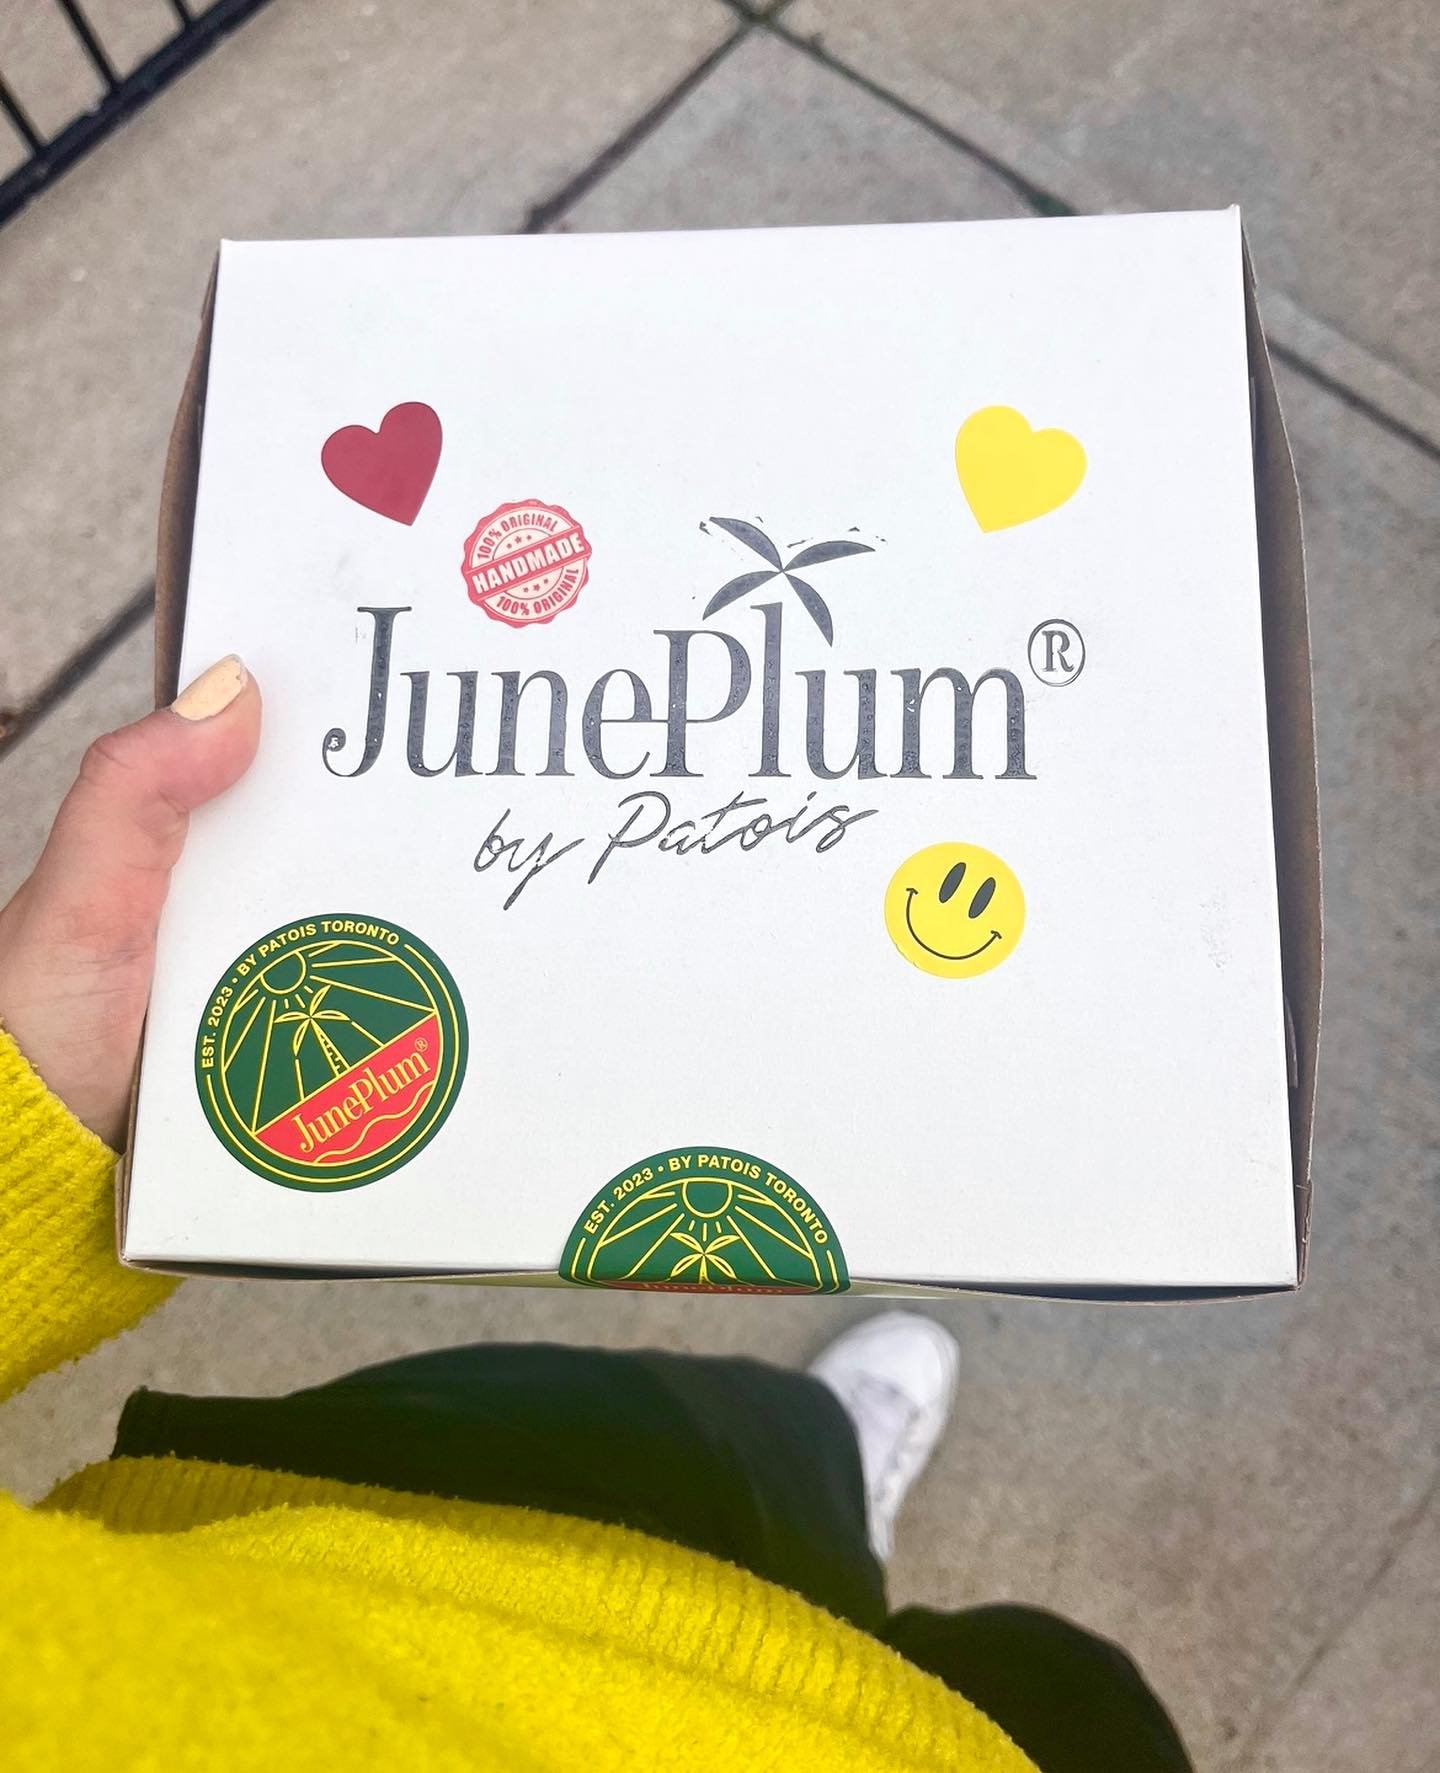 It&rsquo;s a holiday weekend! Stock up on JunePlum patties for your festivities. 

Stop on by or order via UberEats 

#juneplum #juneplumto #patties #jamaicanpatties #jamaicanpatty #pattiesfriendscommunity